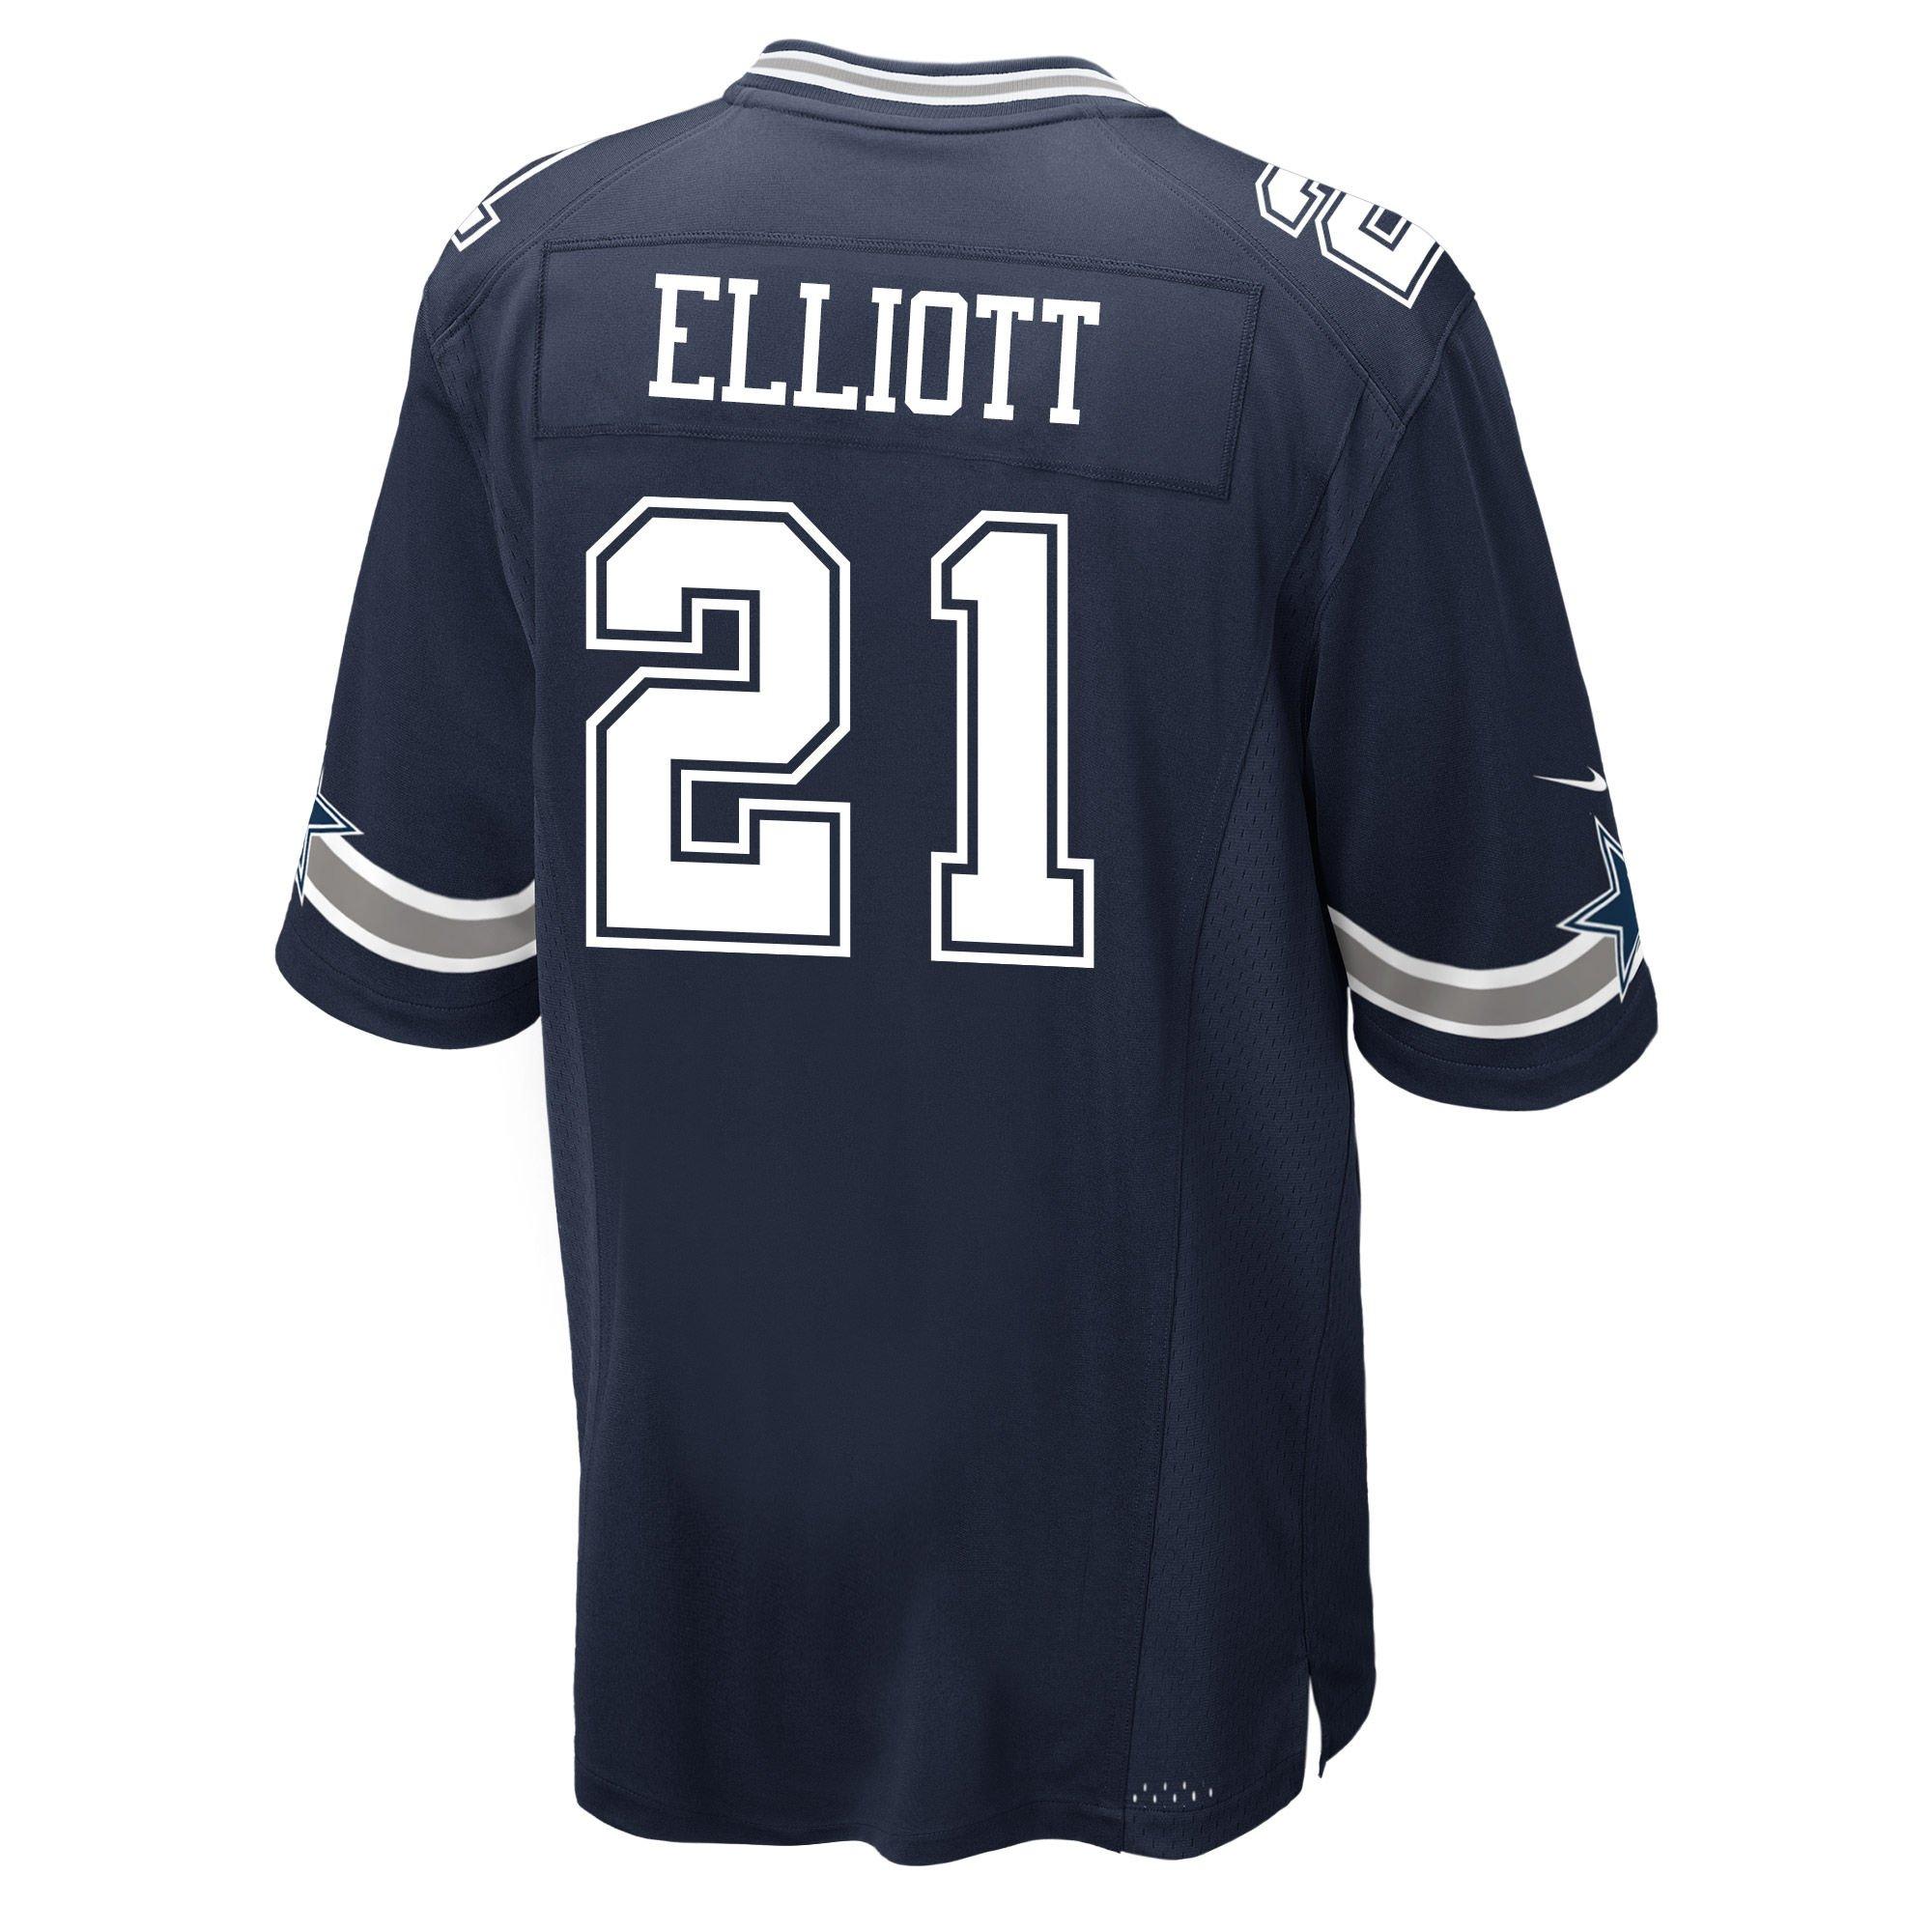 youth cowboys jersey near me